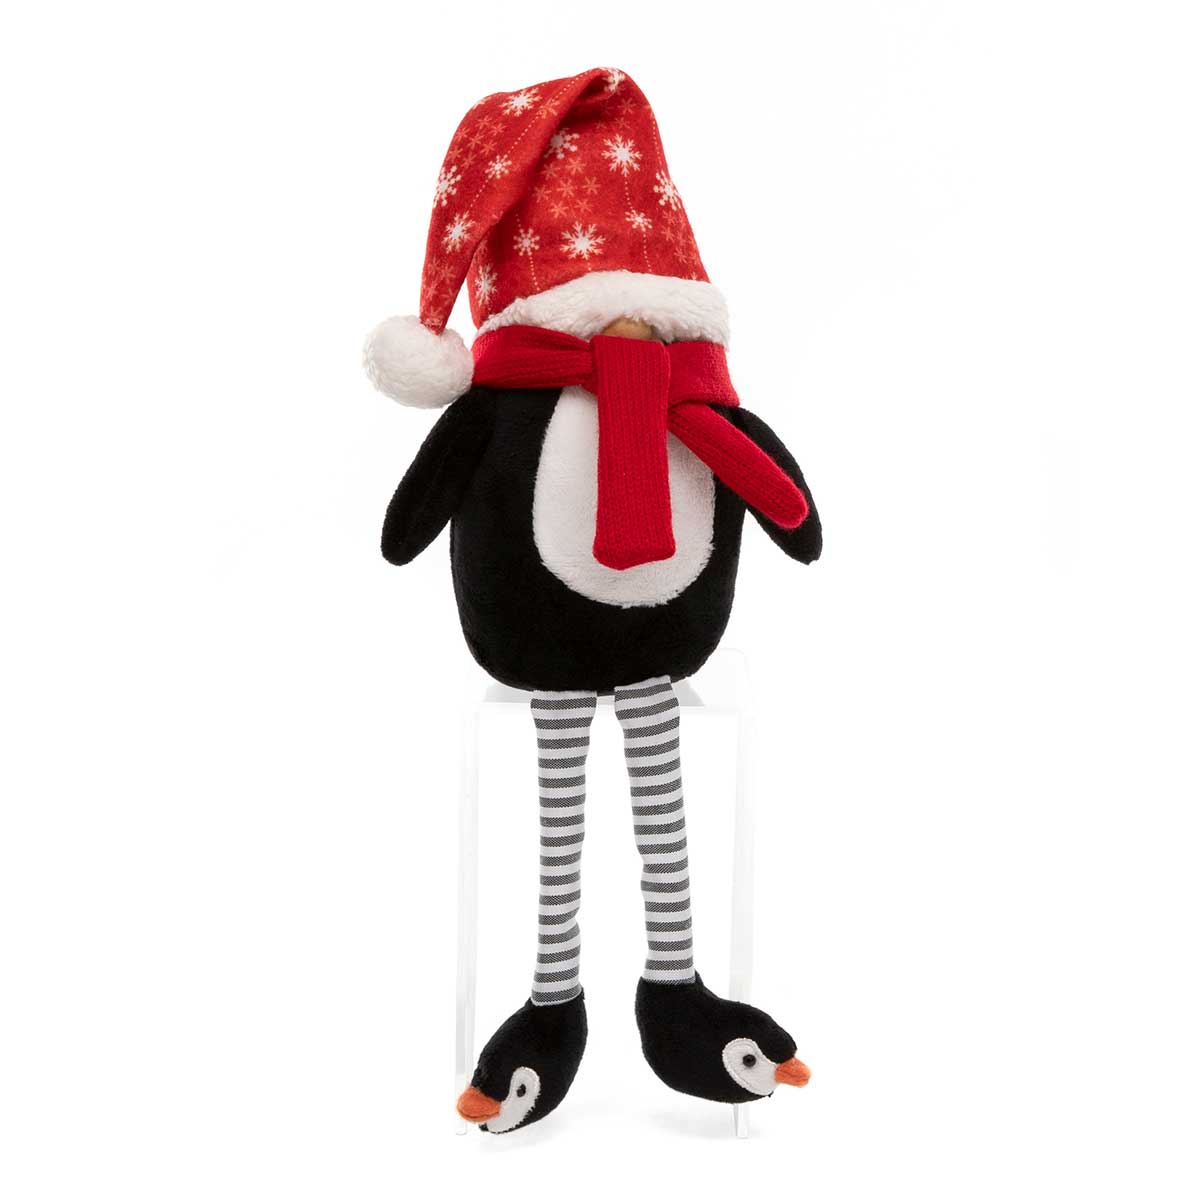 !PENGUIN GNOME WITH RED/WHITE WITH FLOPPY LEGS 20"